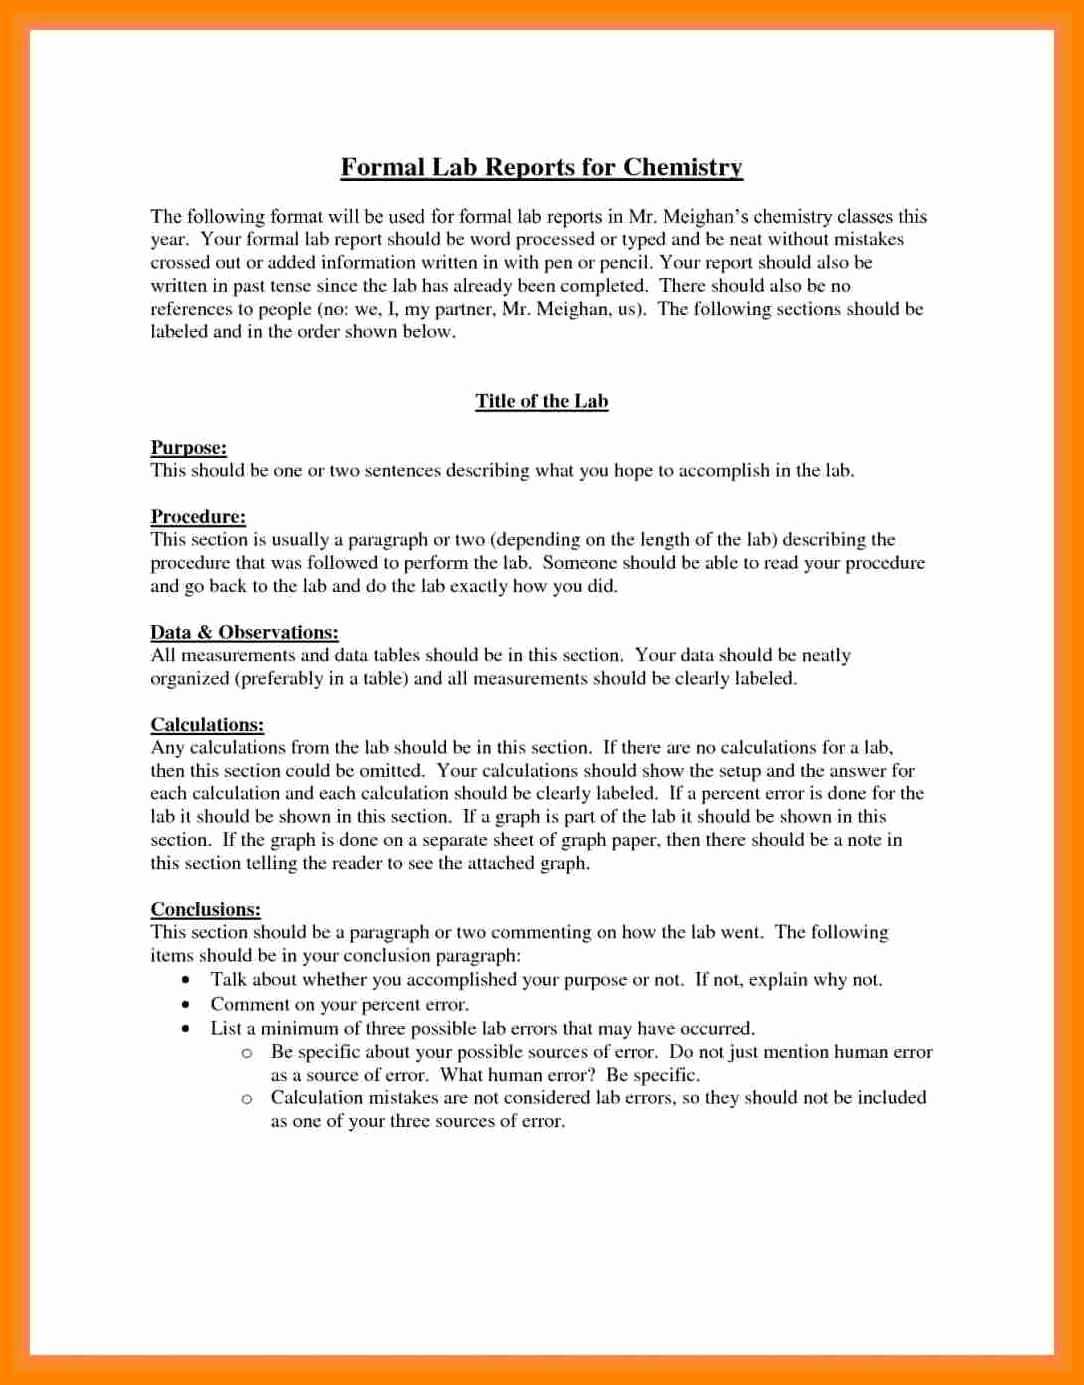 003 Formal Lab Report Example Best Write Up Template Of Within Formal Lab Report Template